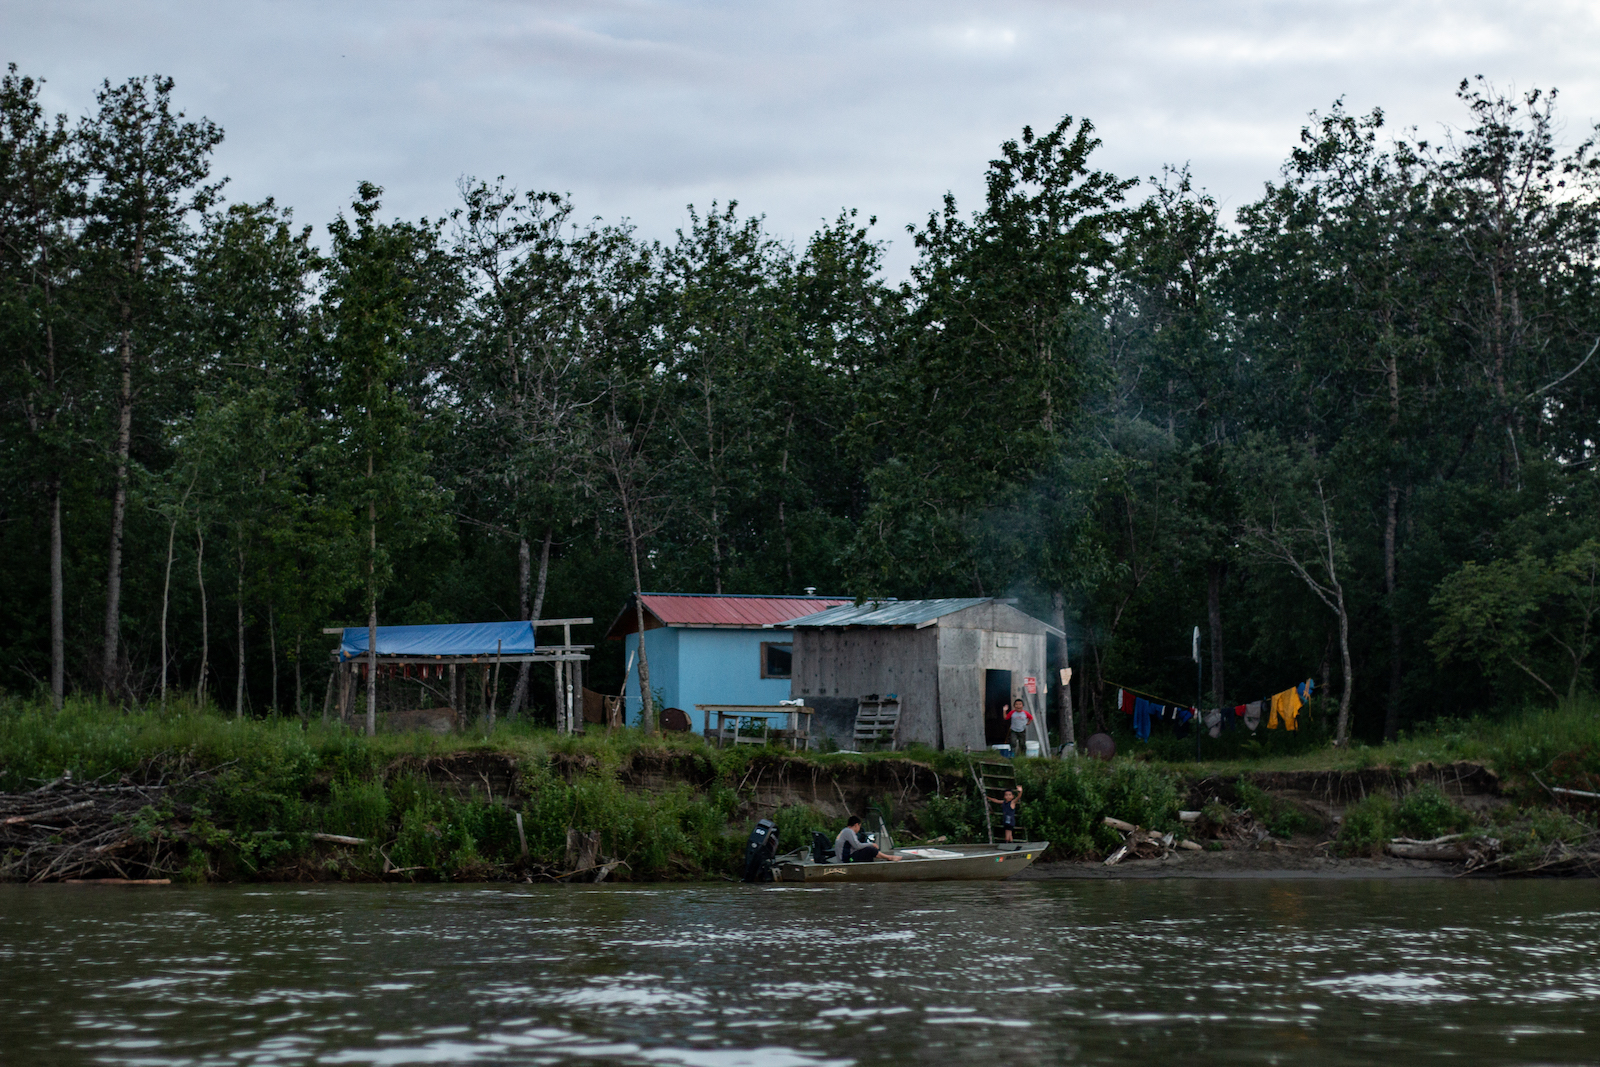 a small boat docks in front of a few small structures on the riverbank